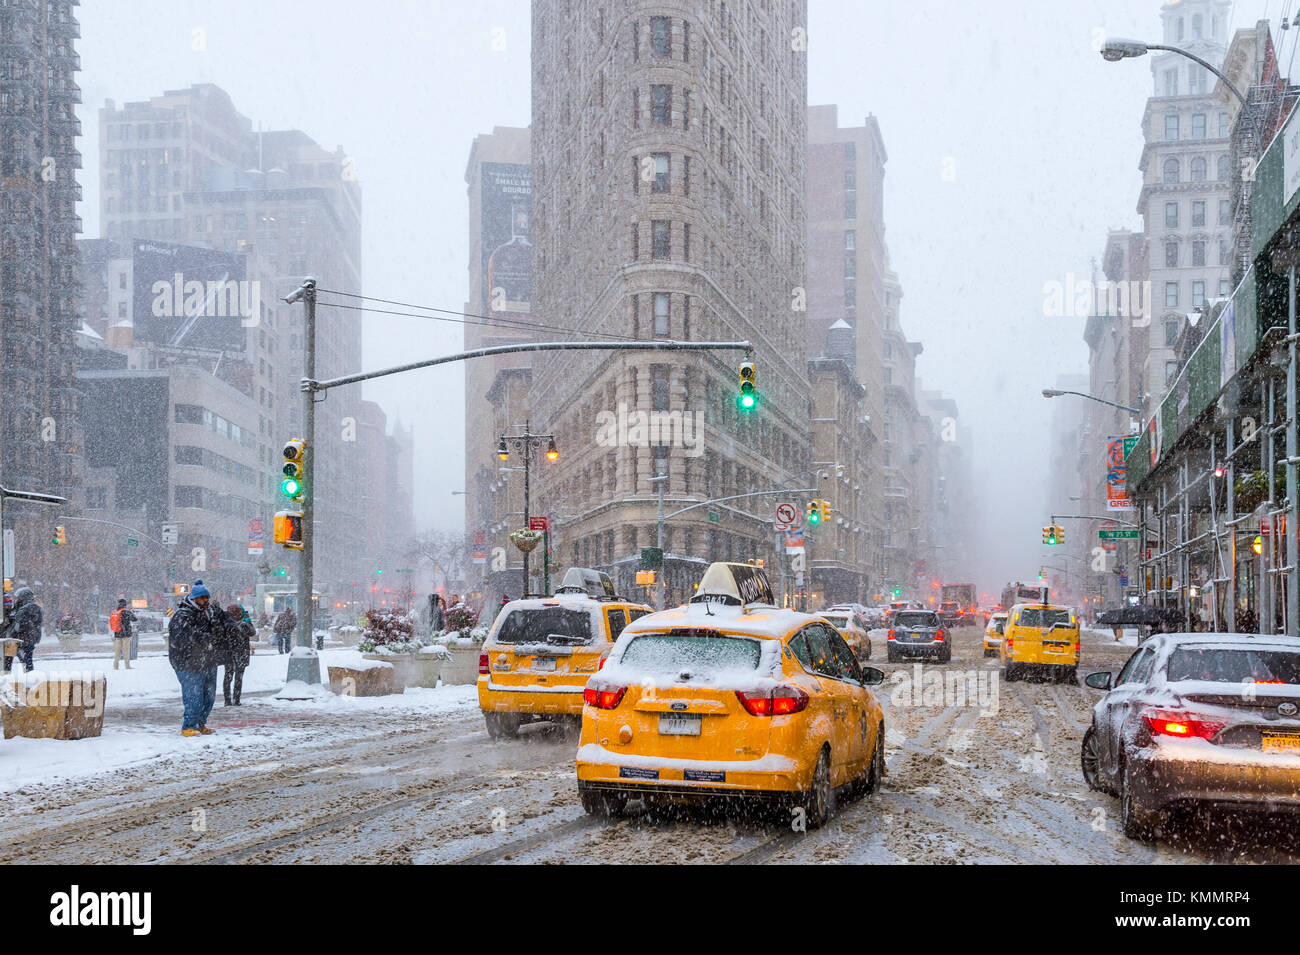 NEW YORK CITY - JANUARY 7, 2017: A winter snowstorm brings pedestrians and traffic to a slow crawl at the Flatiron Building on Fifth Avenue in Midtown Stock Photo